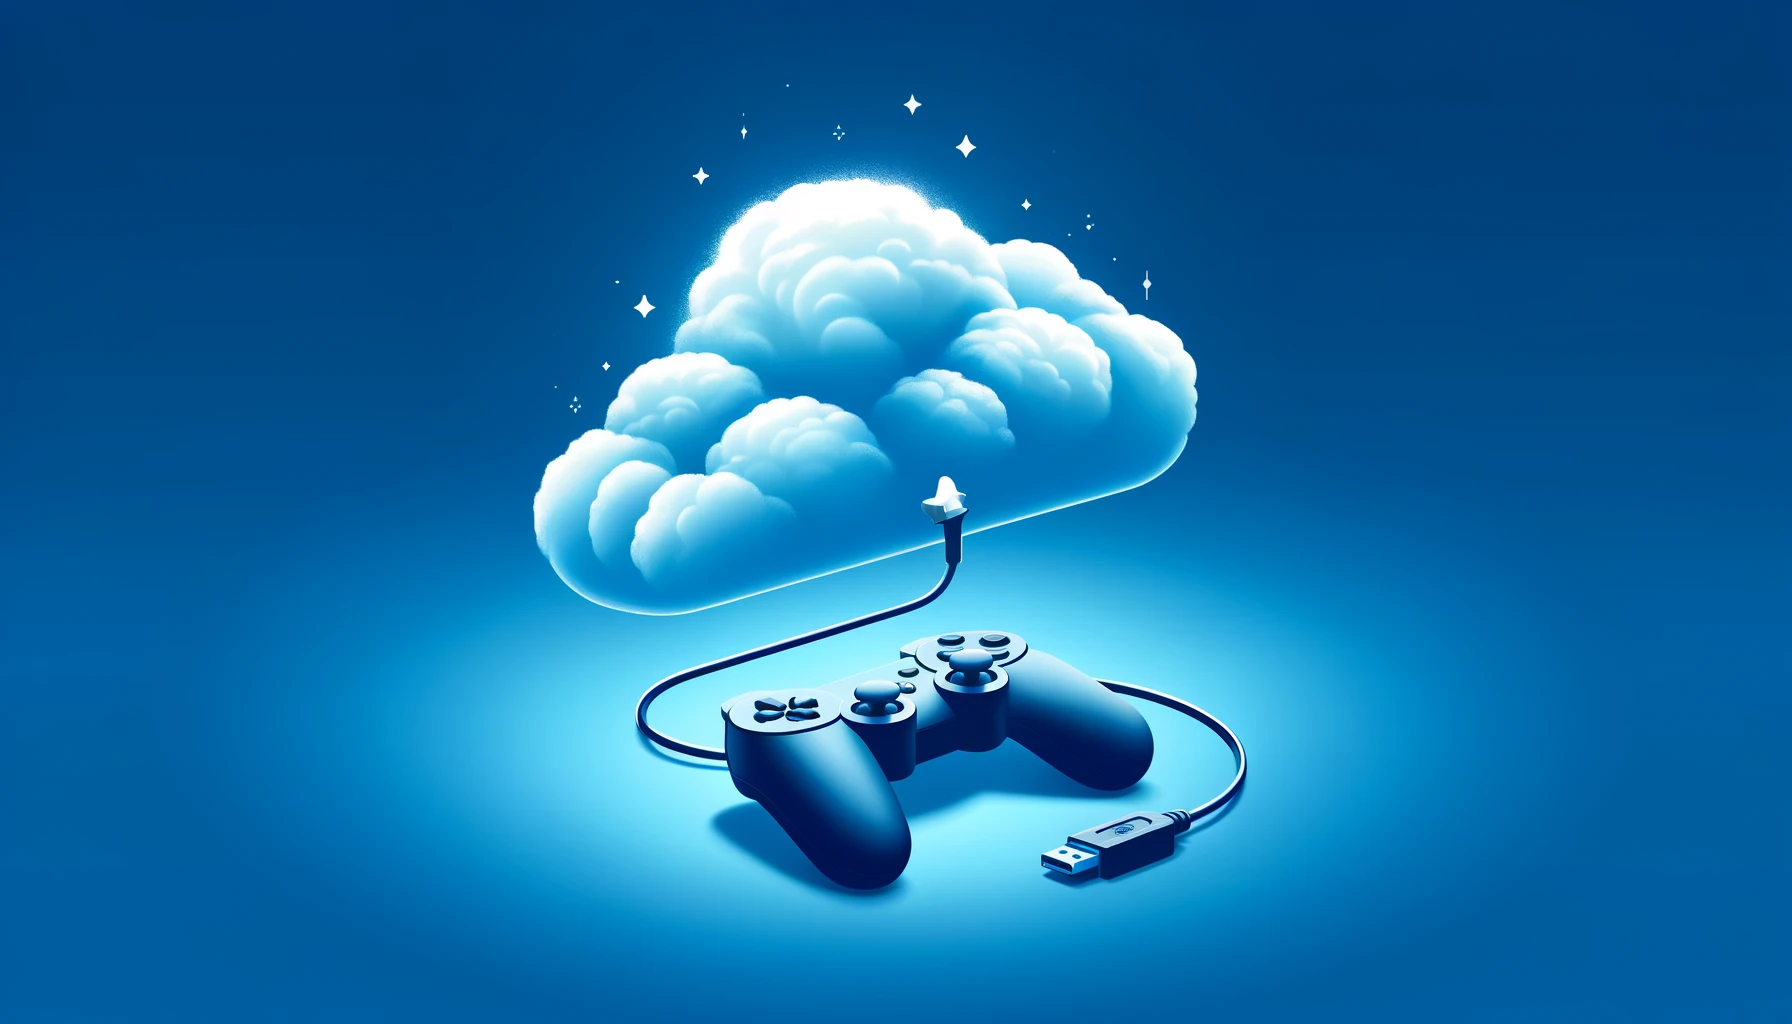 Cloud Gaming Illustration by Hacker9